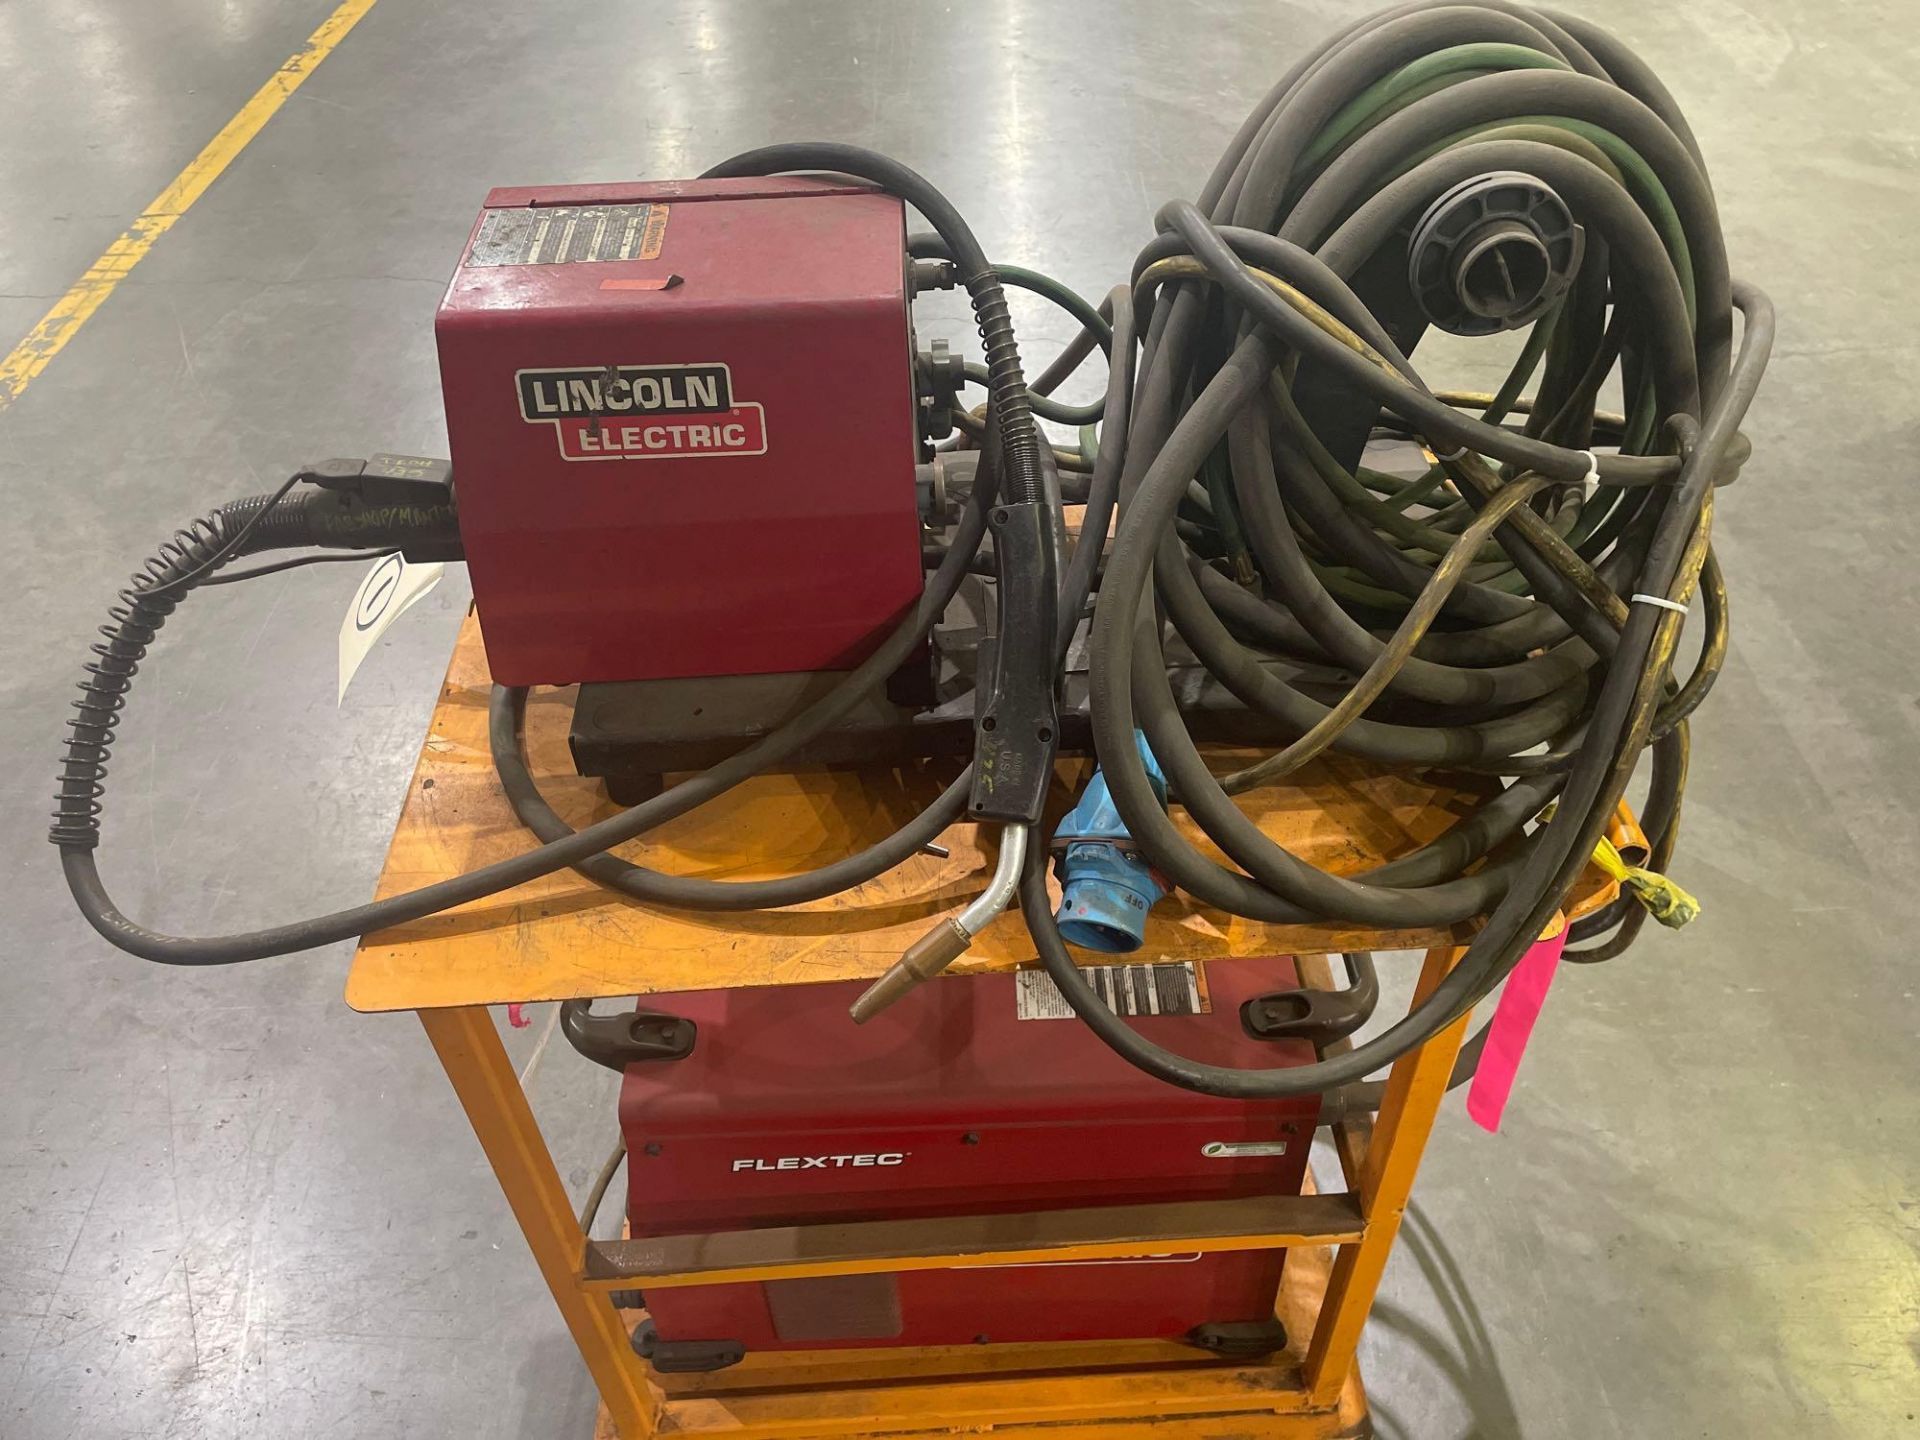 Lincoln Electric Flextec 500 Welding Power Source with LF-74 Wire Feeder - Image 7 of 8